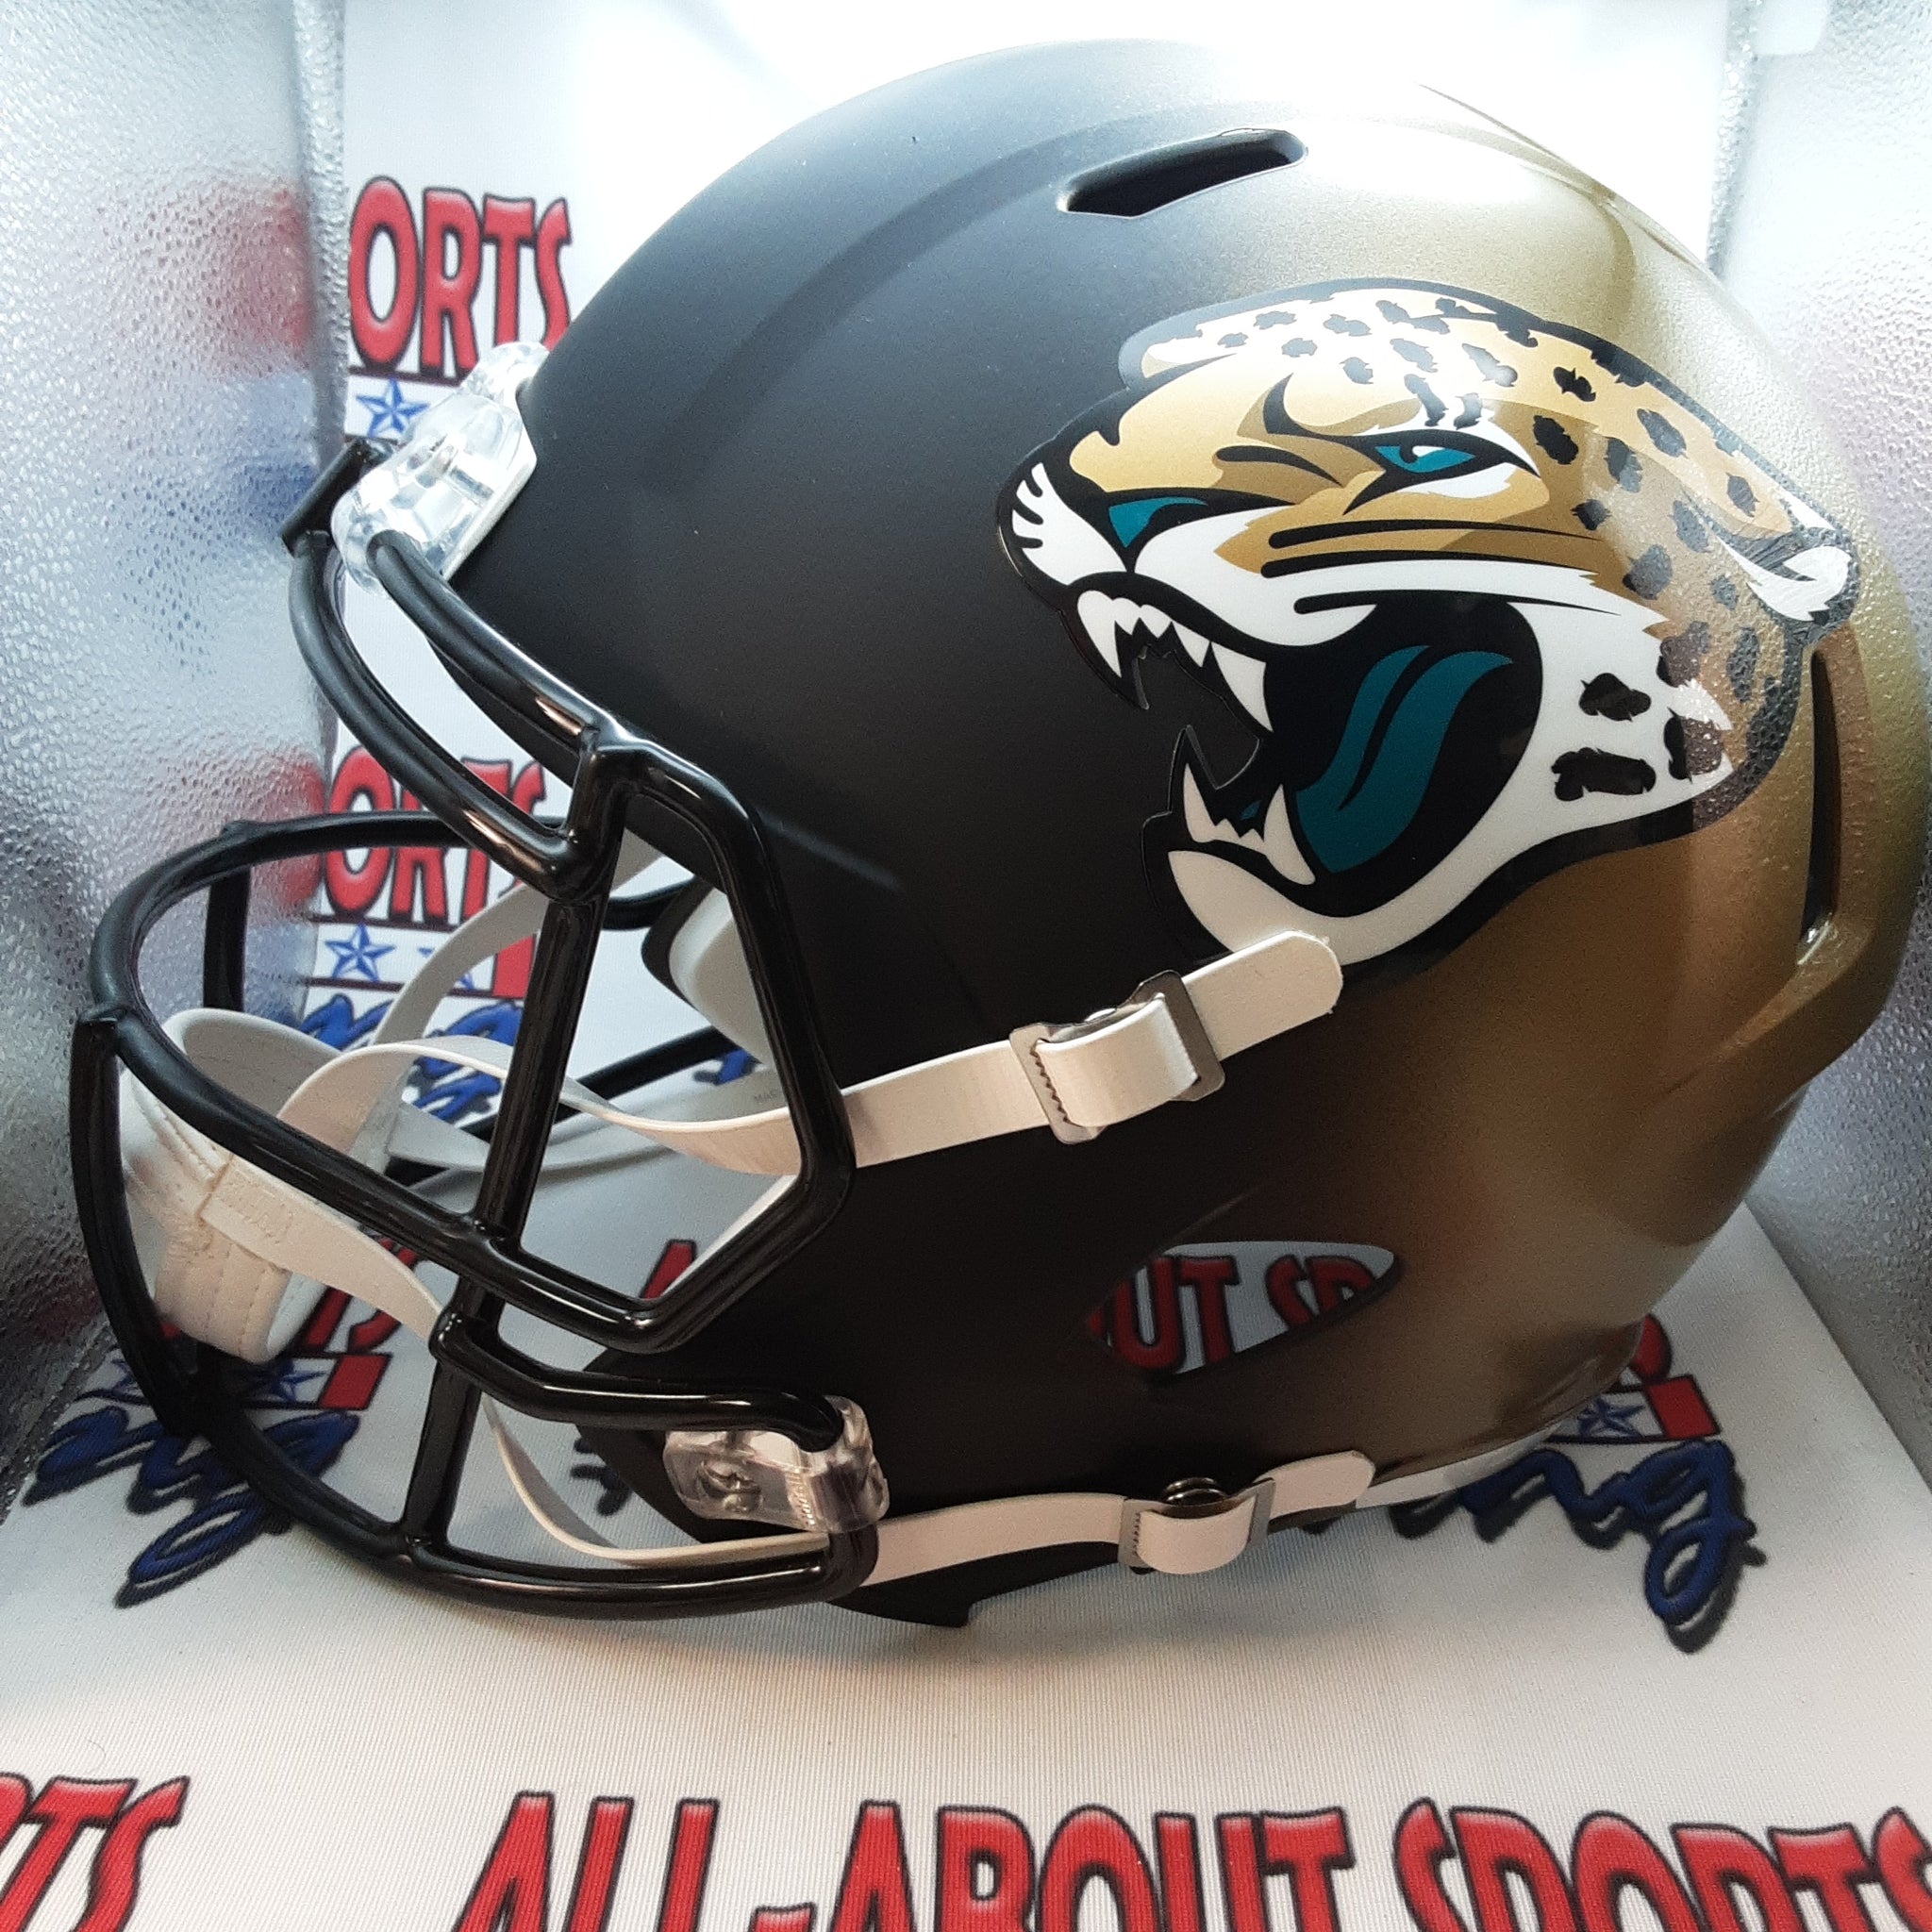 Mark Brunell Authentic Signed Autographed Full-size Replica Helmet JSA